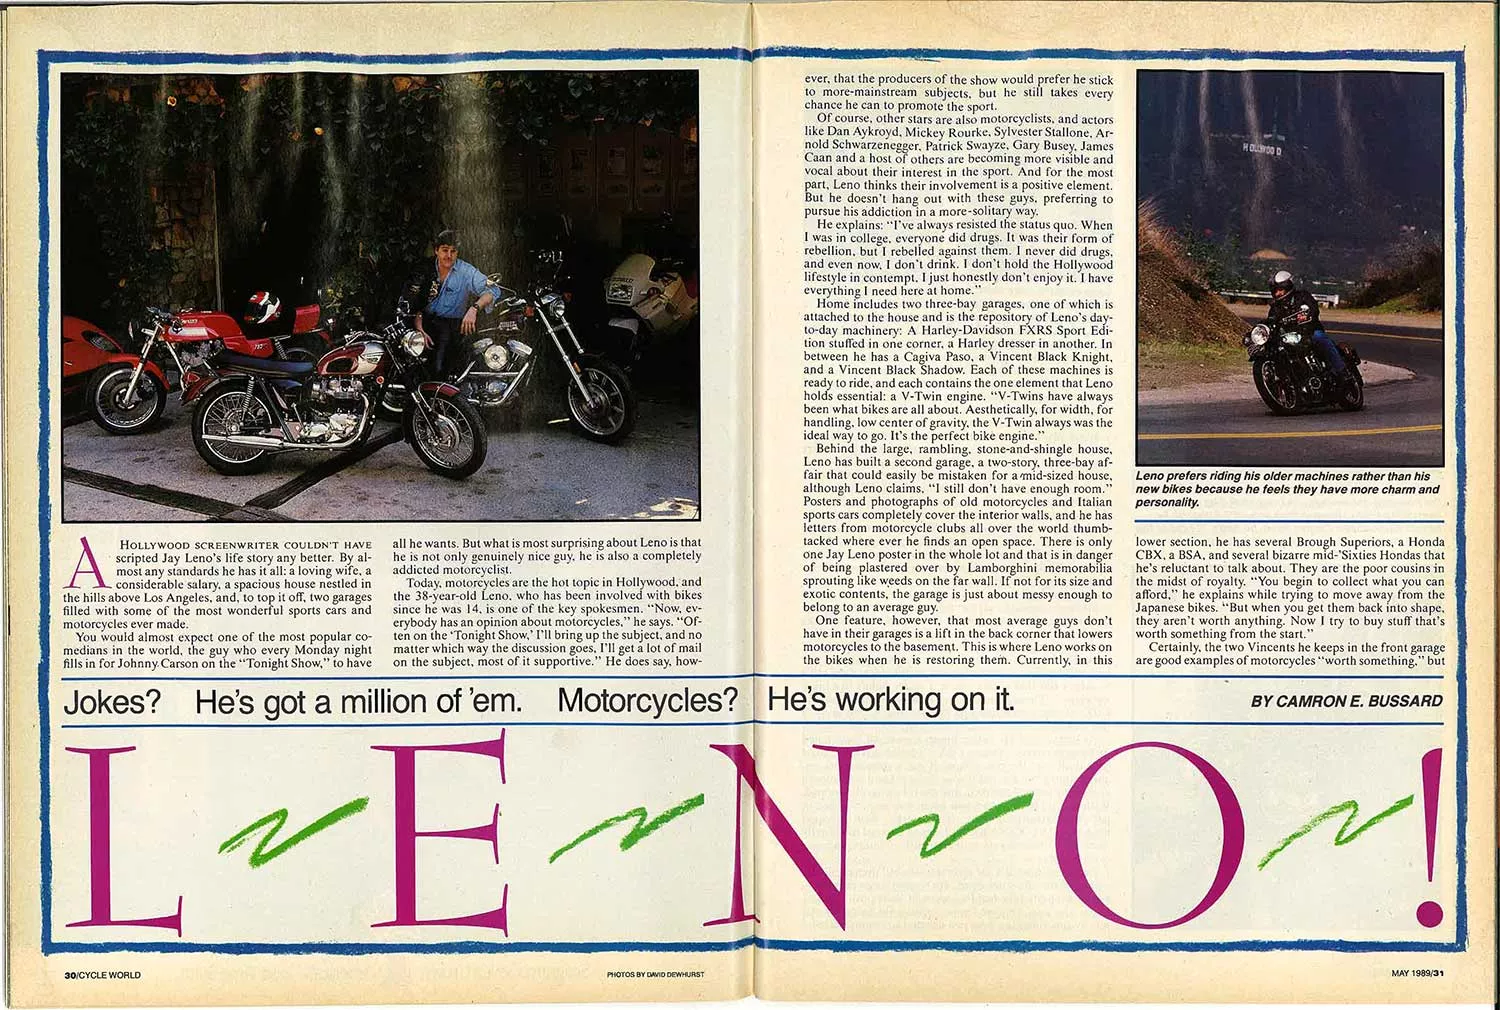 Leno has been involved with motorcycles since he was 14 and, as of ’89, owned an FXRS Sport Edition.